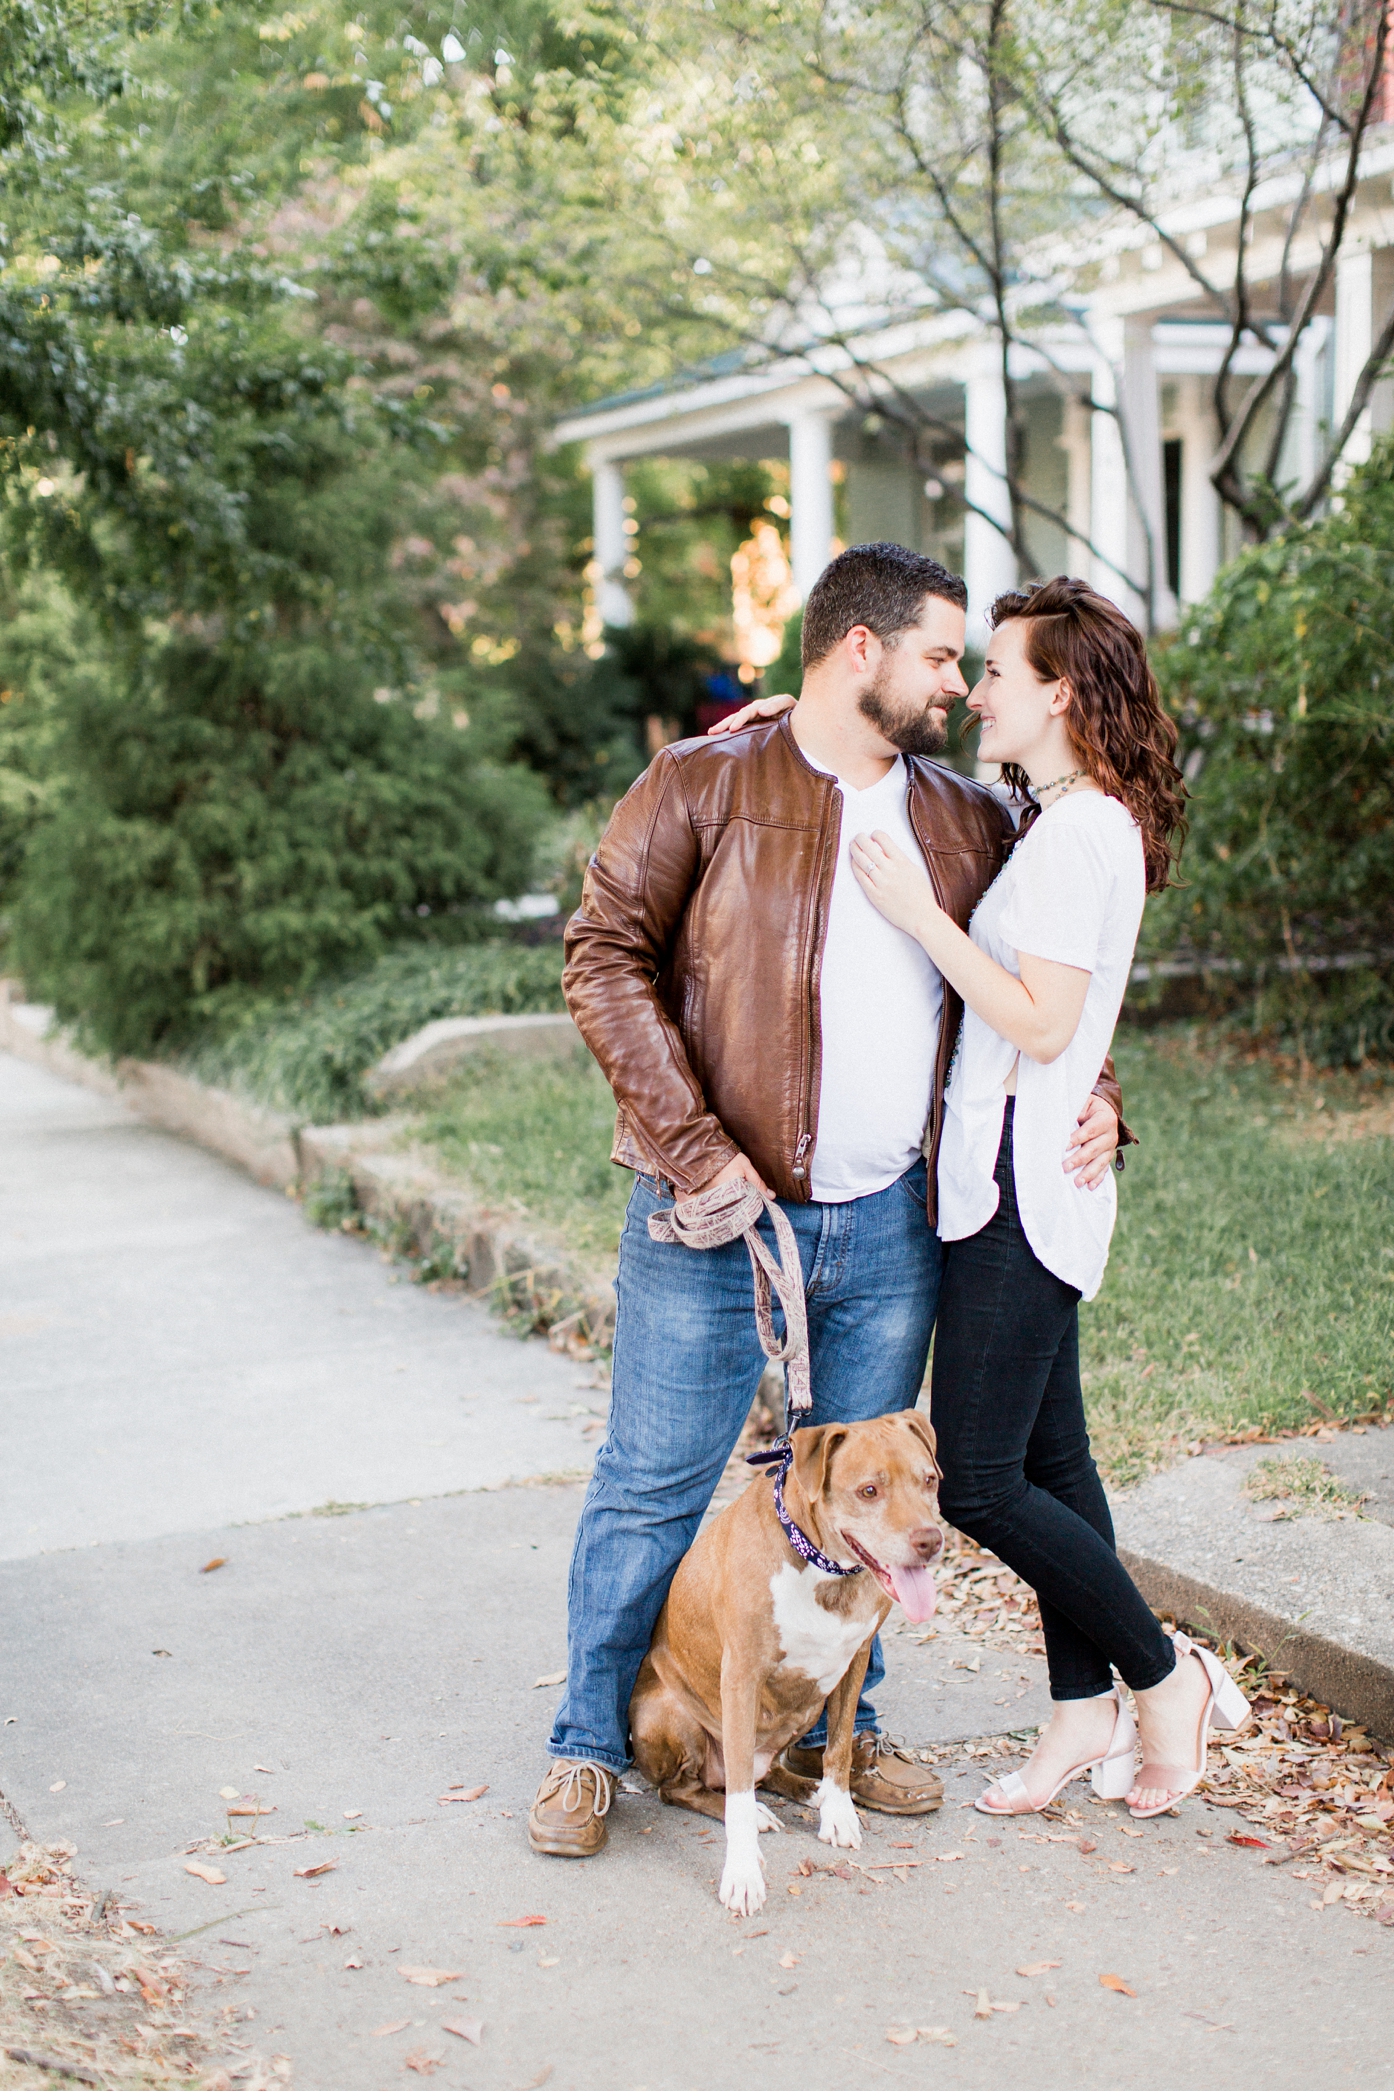 Richmond Engagement Session in The Fan by Alisandra Photography